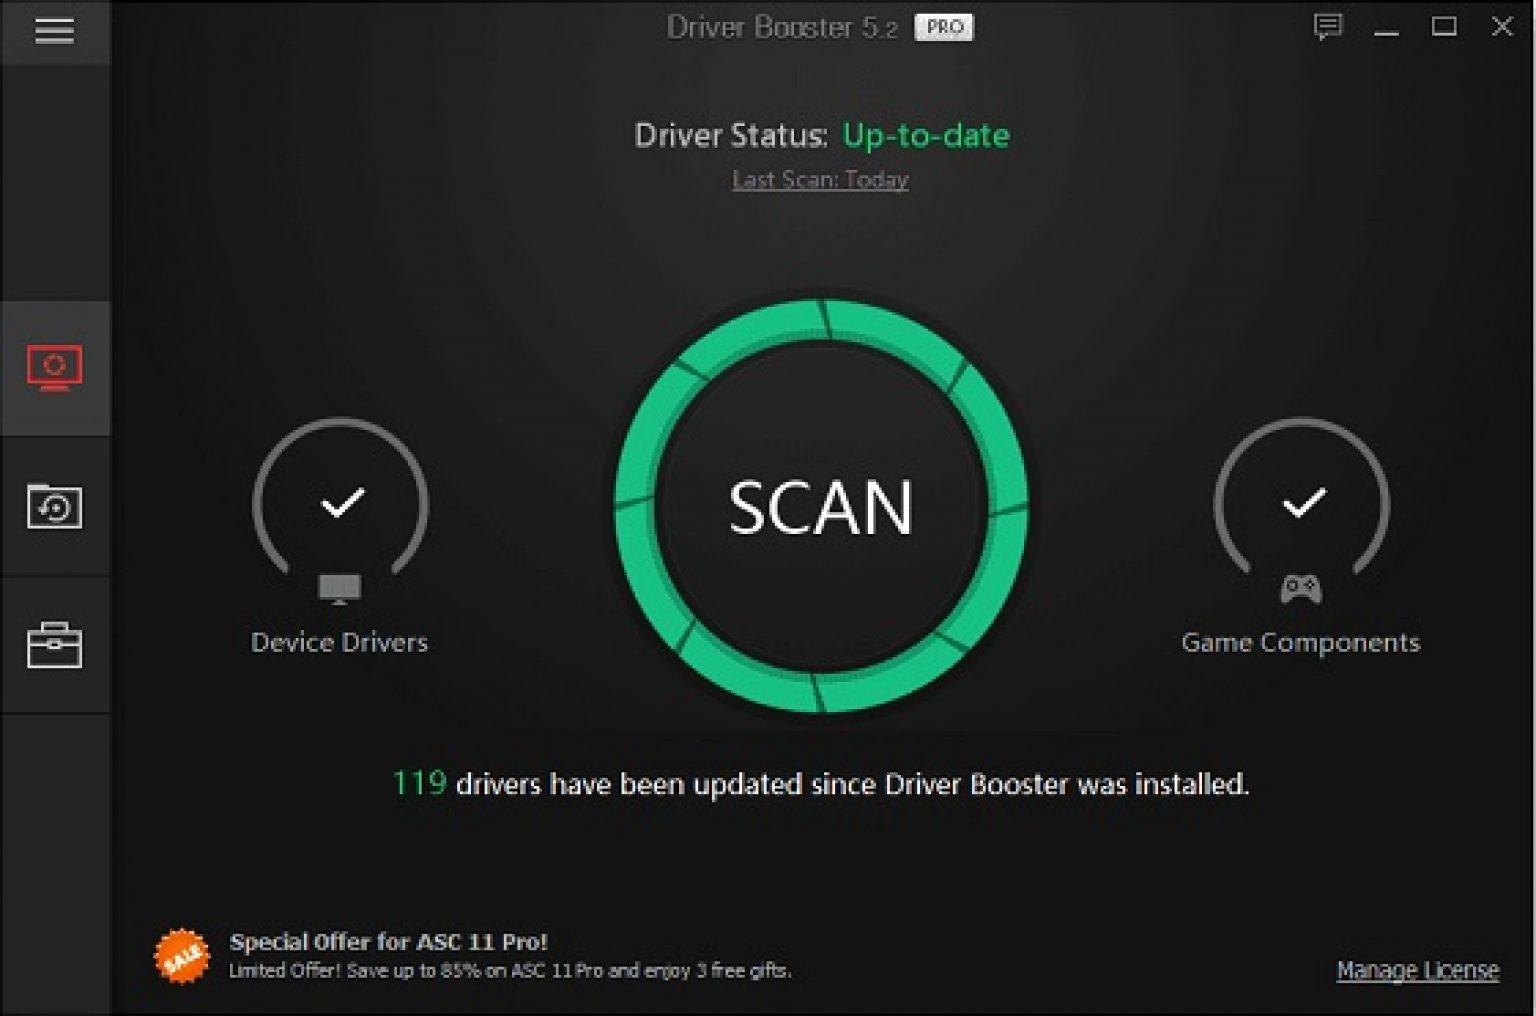 IObit Driver Booster Pro 11.0.0.21 free